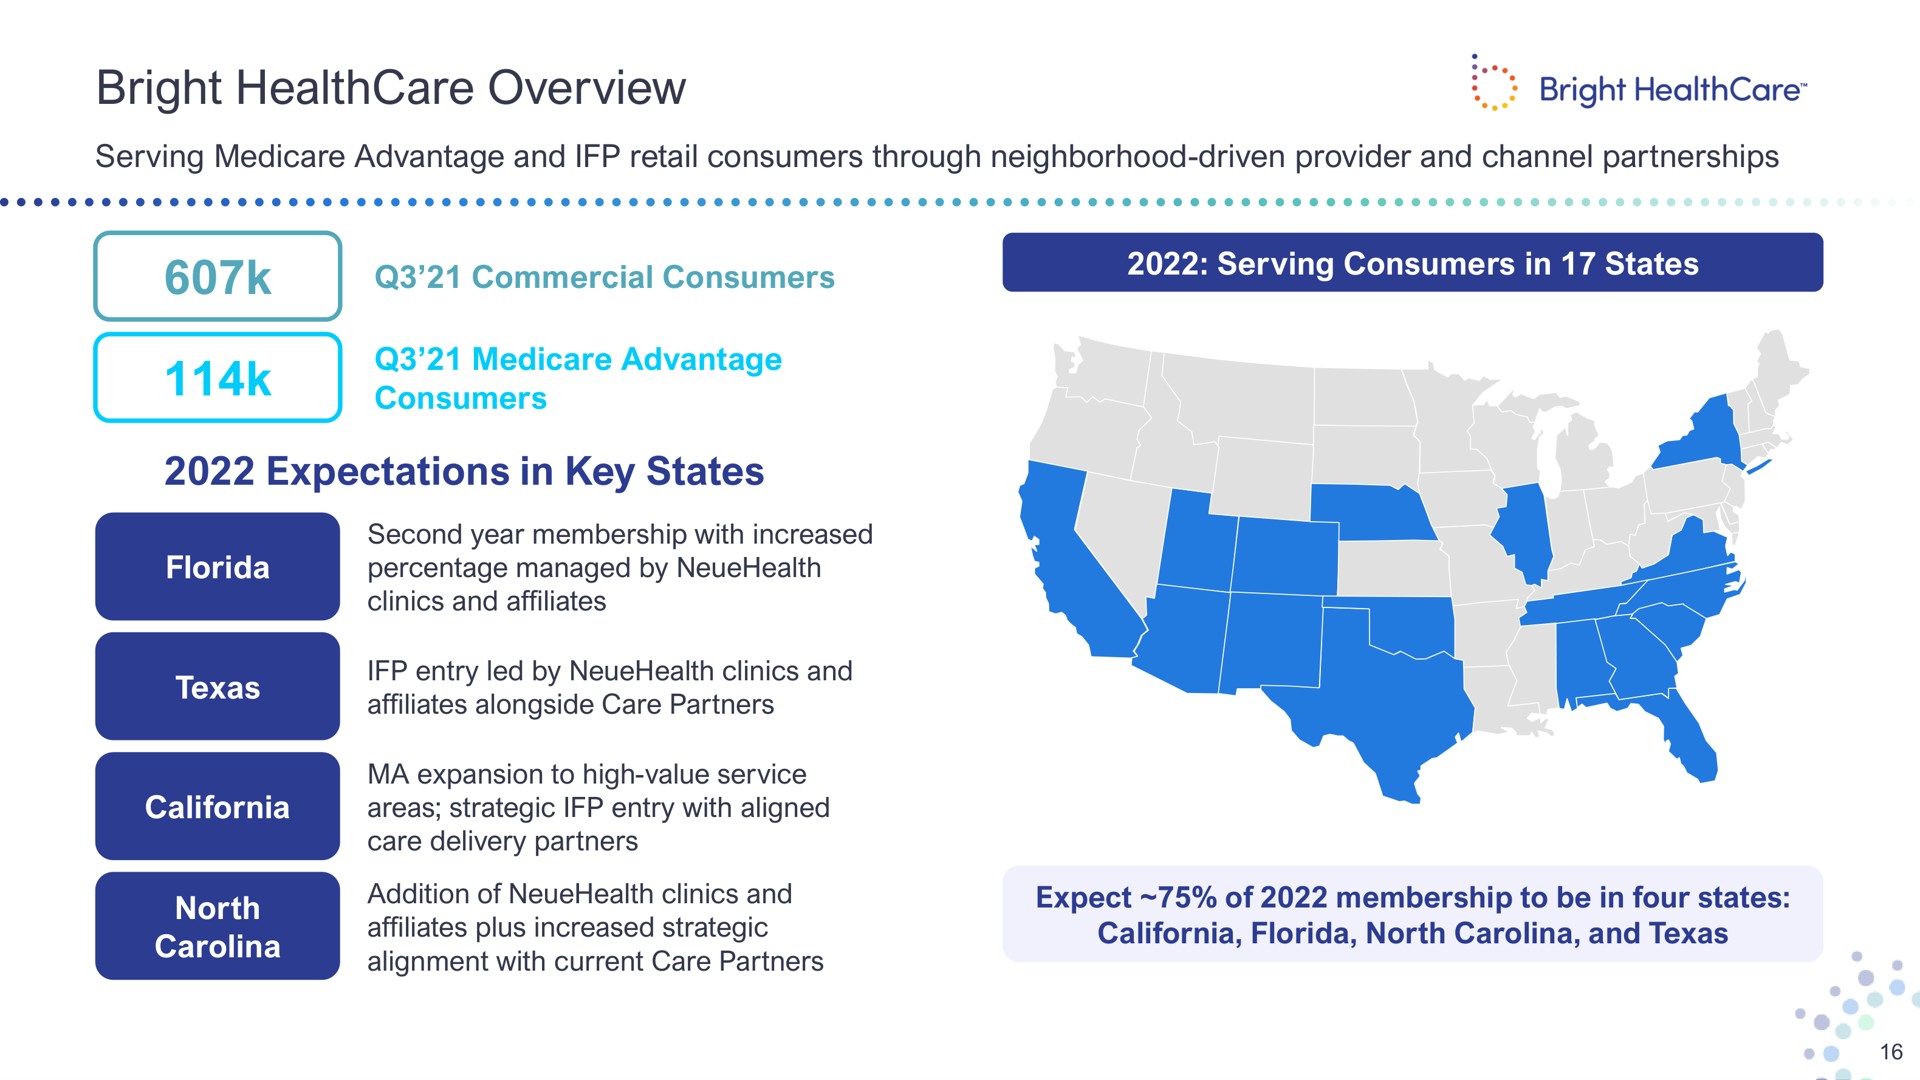 bright overview expectations in key states as serving advantage and retail consumers through neighborhood driven provider and channel partnerships commercial consumers serving consumers advantage consumers second year membership with increased percentage managed by clinics and affiliates entry led by clinics and affiliates alongside care partners north expansion to high value service areas strategic entry with aligned care delivery partners addition of clinics and affiliates plus increased strategic alignment with current care partners nae expect of membership to be four north and | Bright Health Group